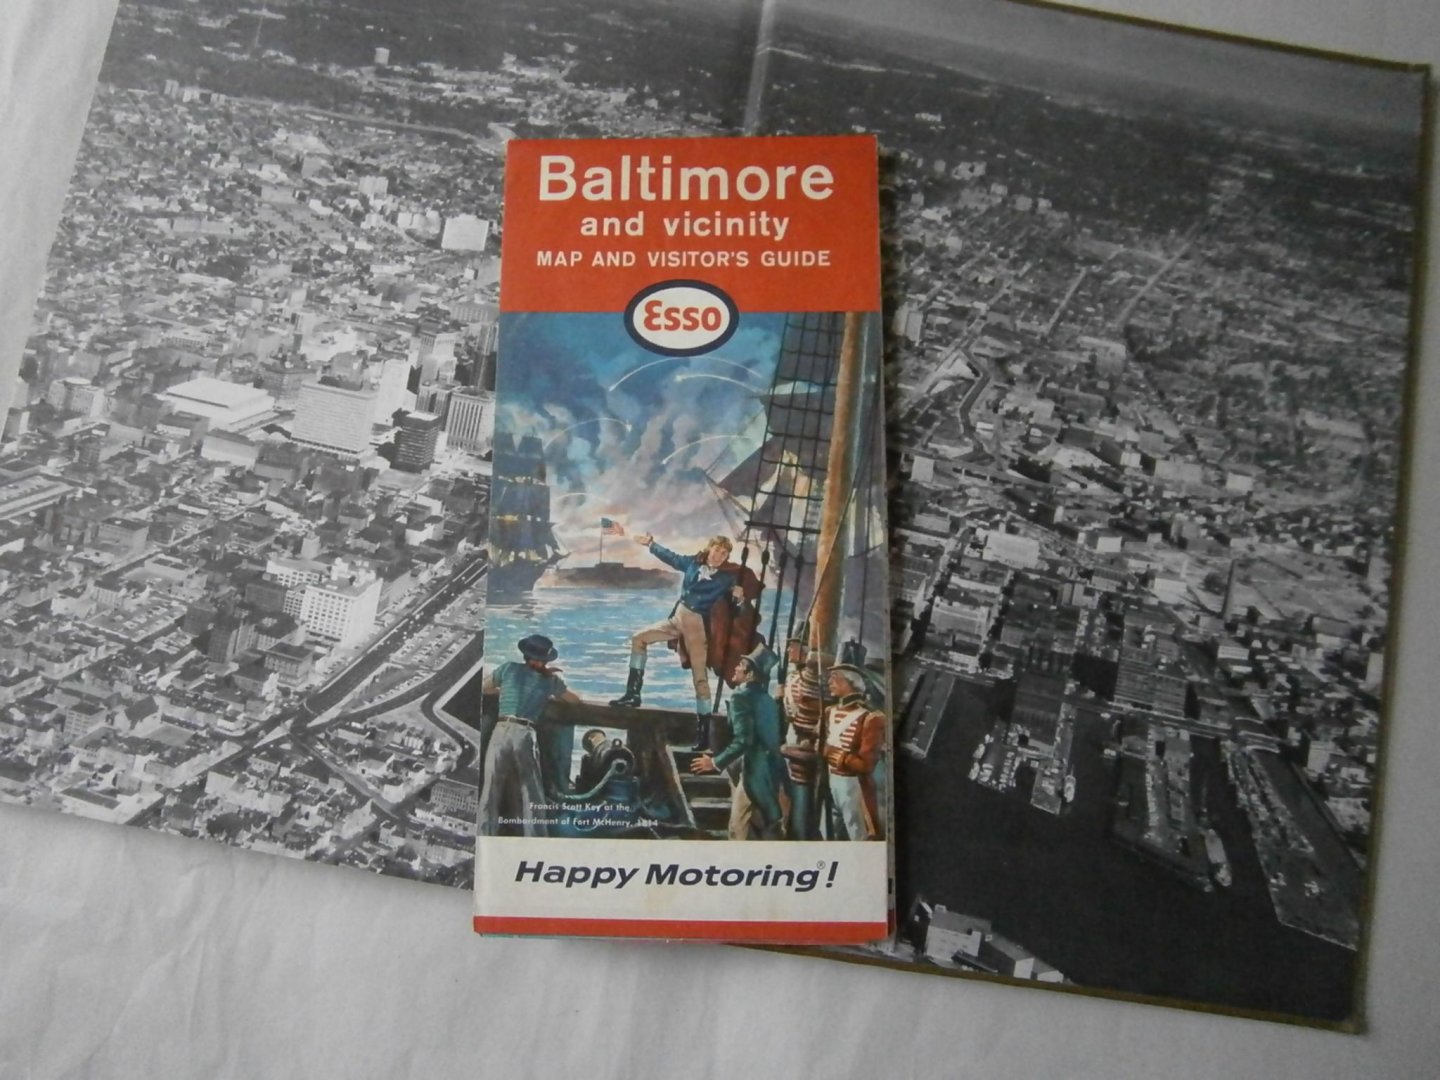 Beirne, Francis F. - Baltimore .... a picture history 1858-1968